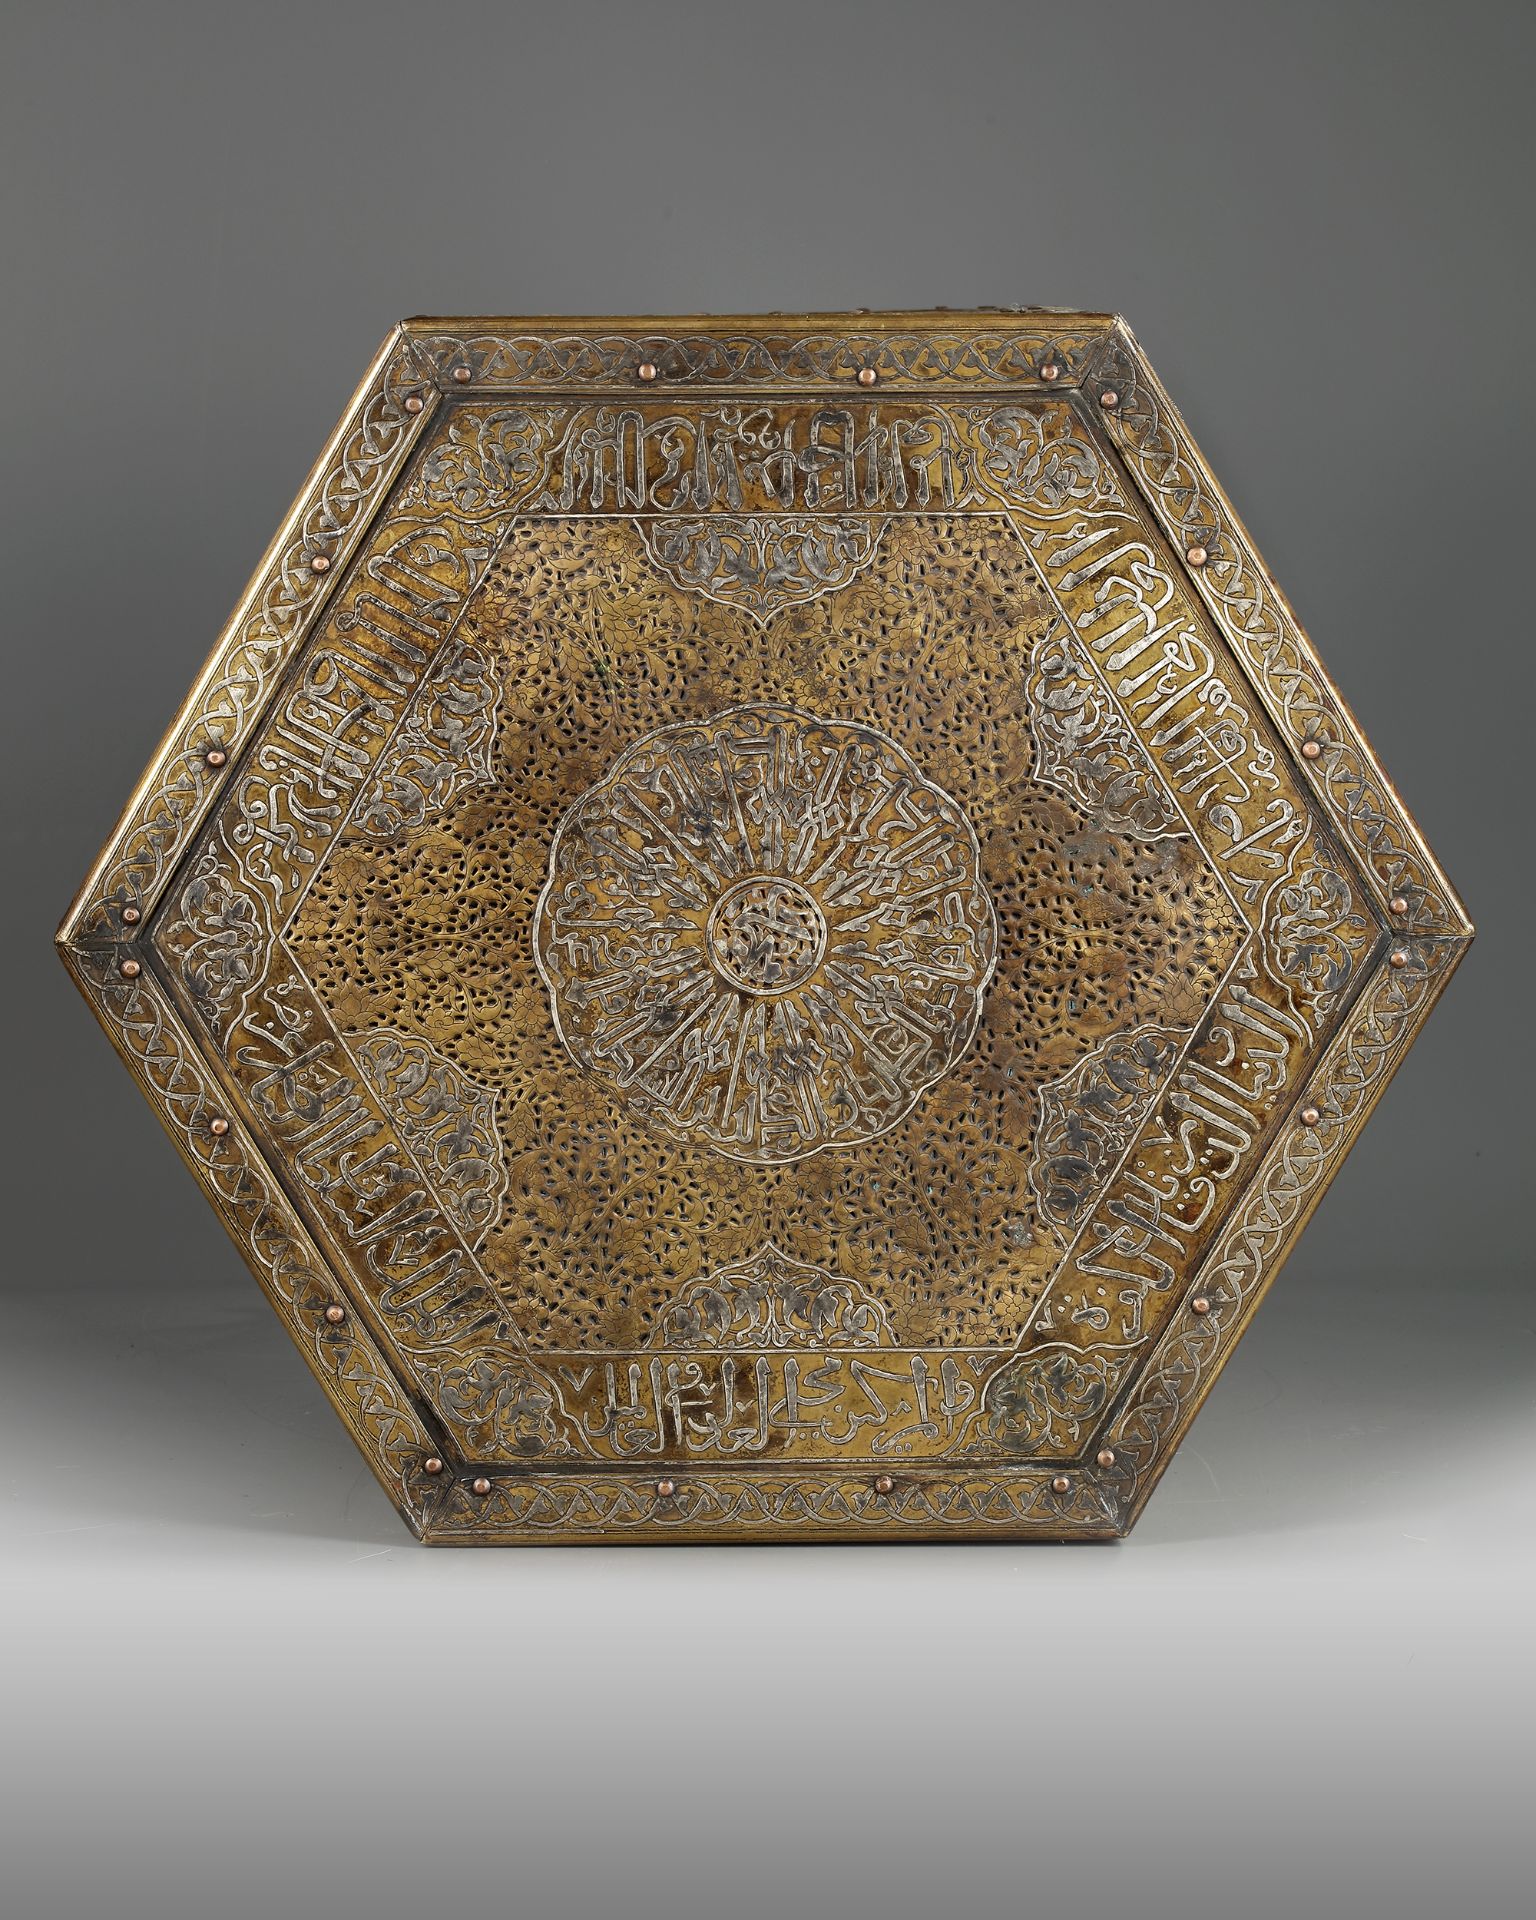 A LARGE CAIROWARE GOLD, SILVER AND COPPER INLAID BRASS KURSI, LATE 19TH CENTURY - Image 5 of 5